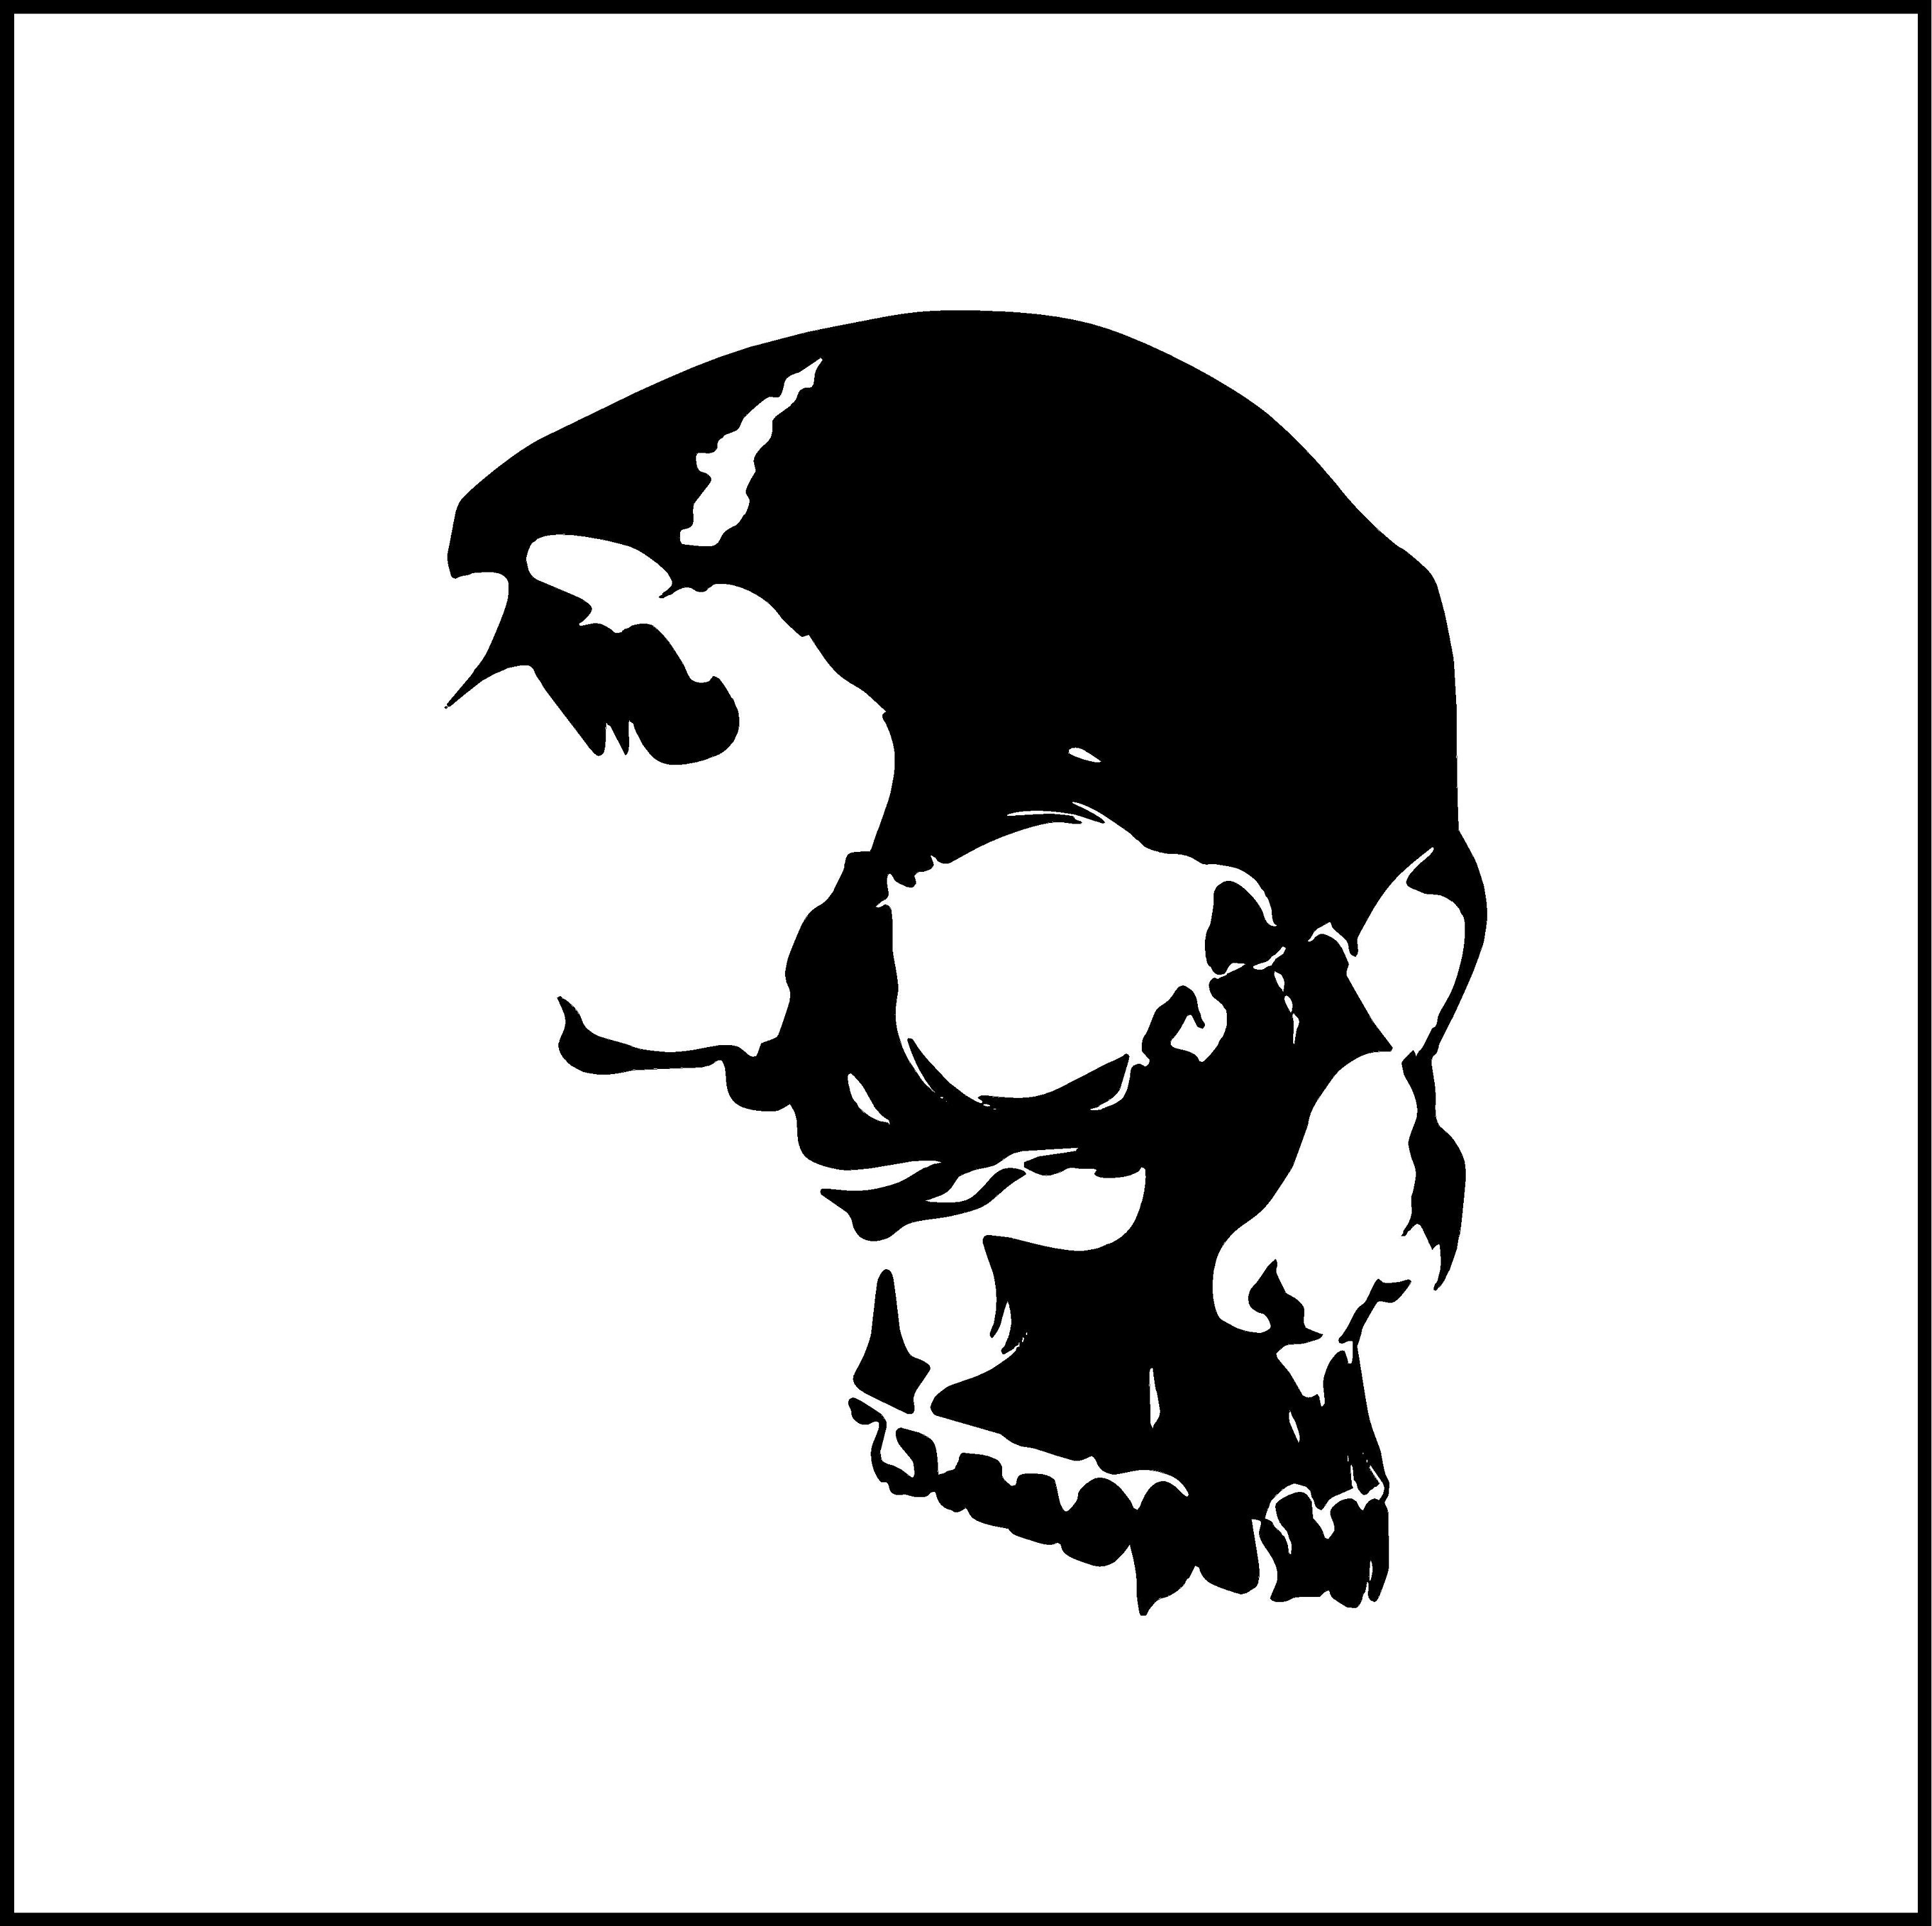 Skull Decal Stickers Truck Decal Car Decal Boat Decal Skull Vinyl Accessory  Skull Head Decal Large Skull Decal Hood Decal 